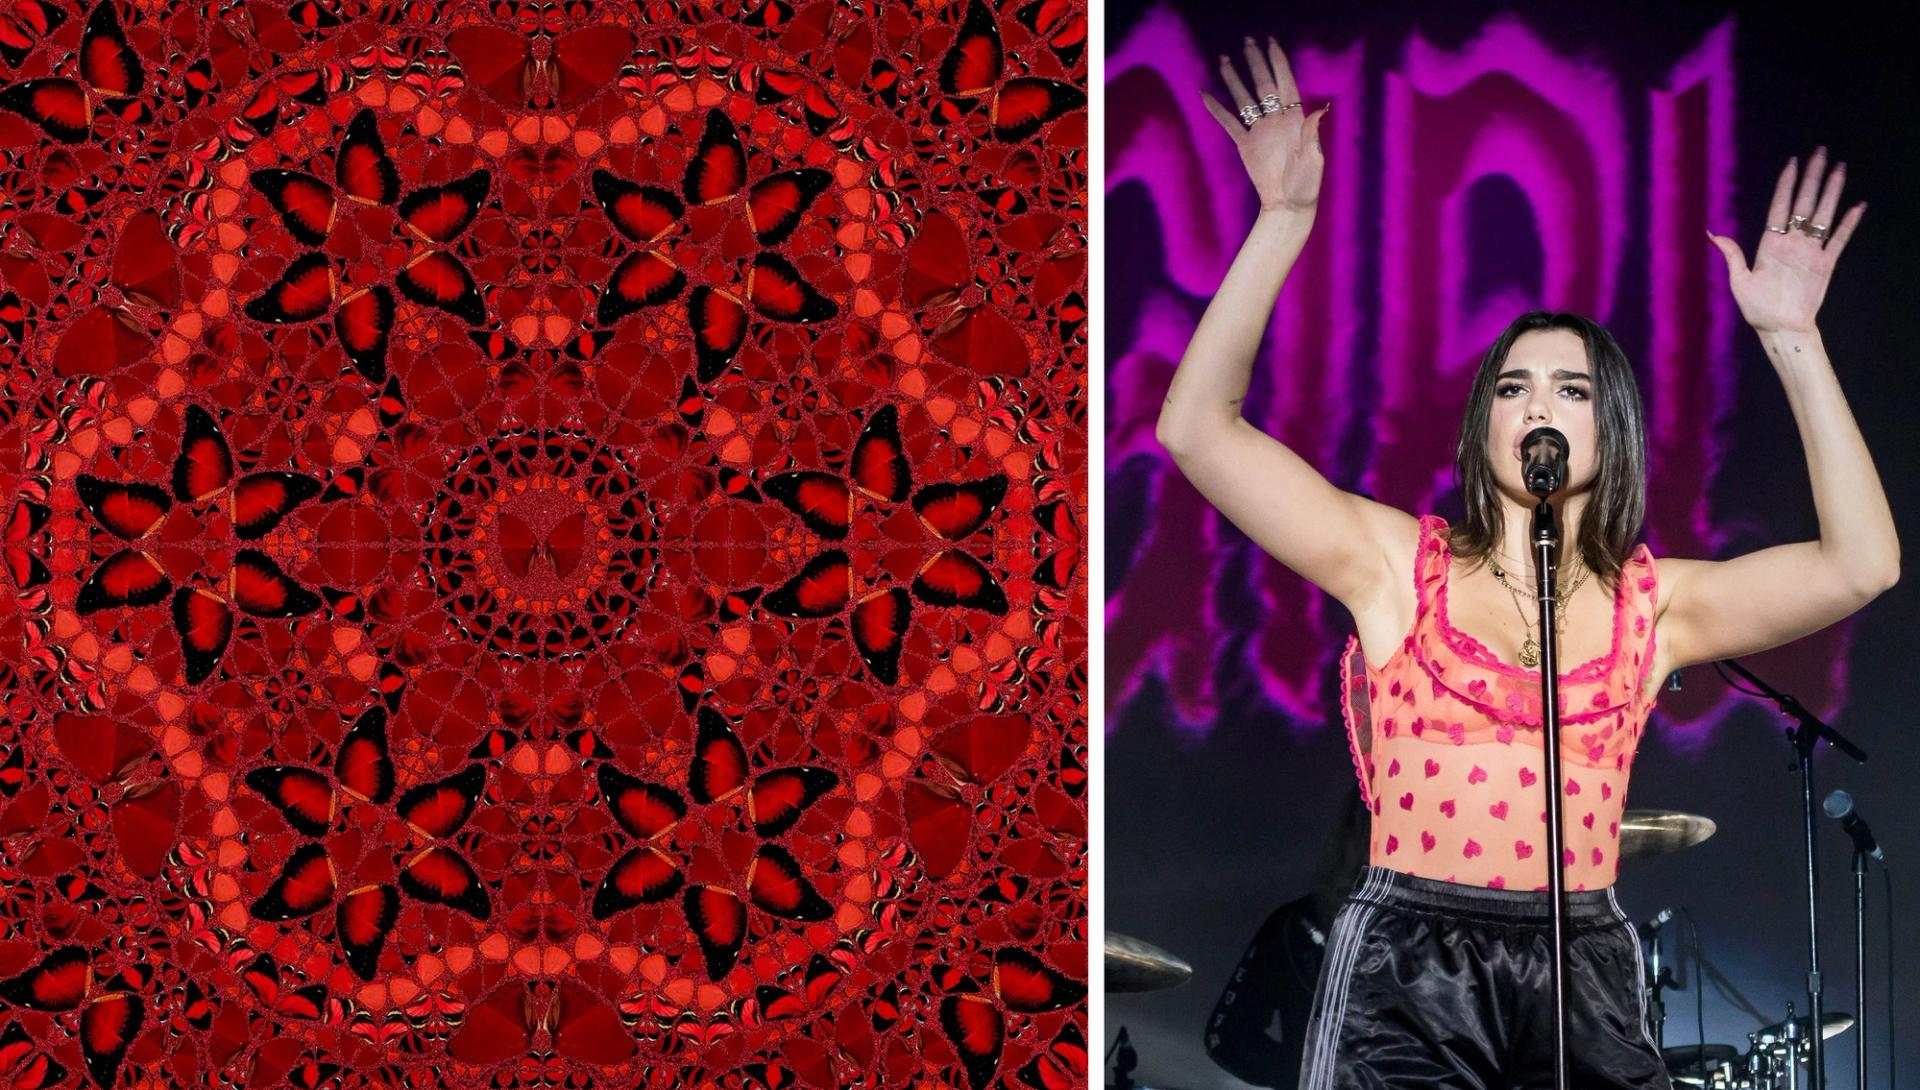 Damien Hirst's Wu Zetian, a print and NFT produced with the art and technology company Heni (left) is now owned by pop star Dua Lipa (right) Hirst: courtesy of Heni; Dua Lipa: Justin Higuchi